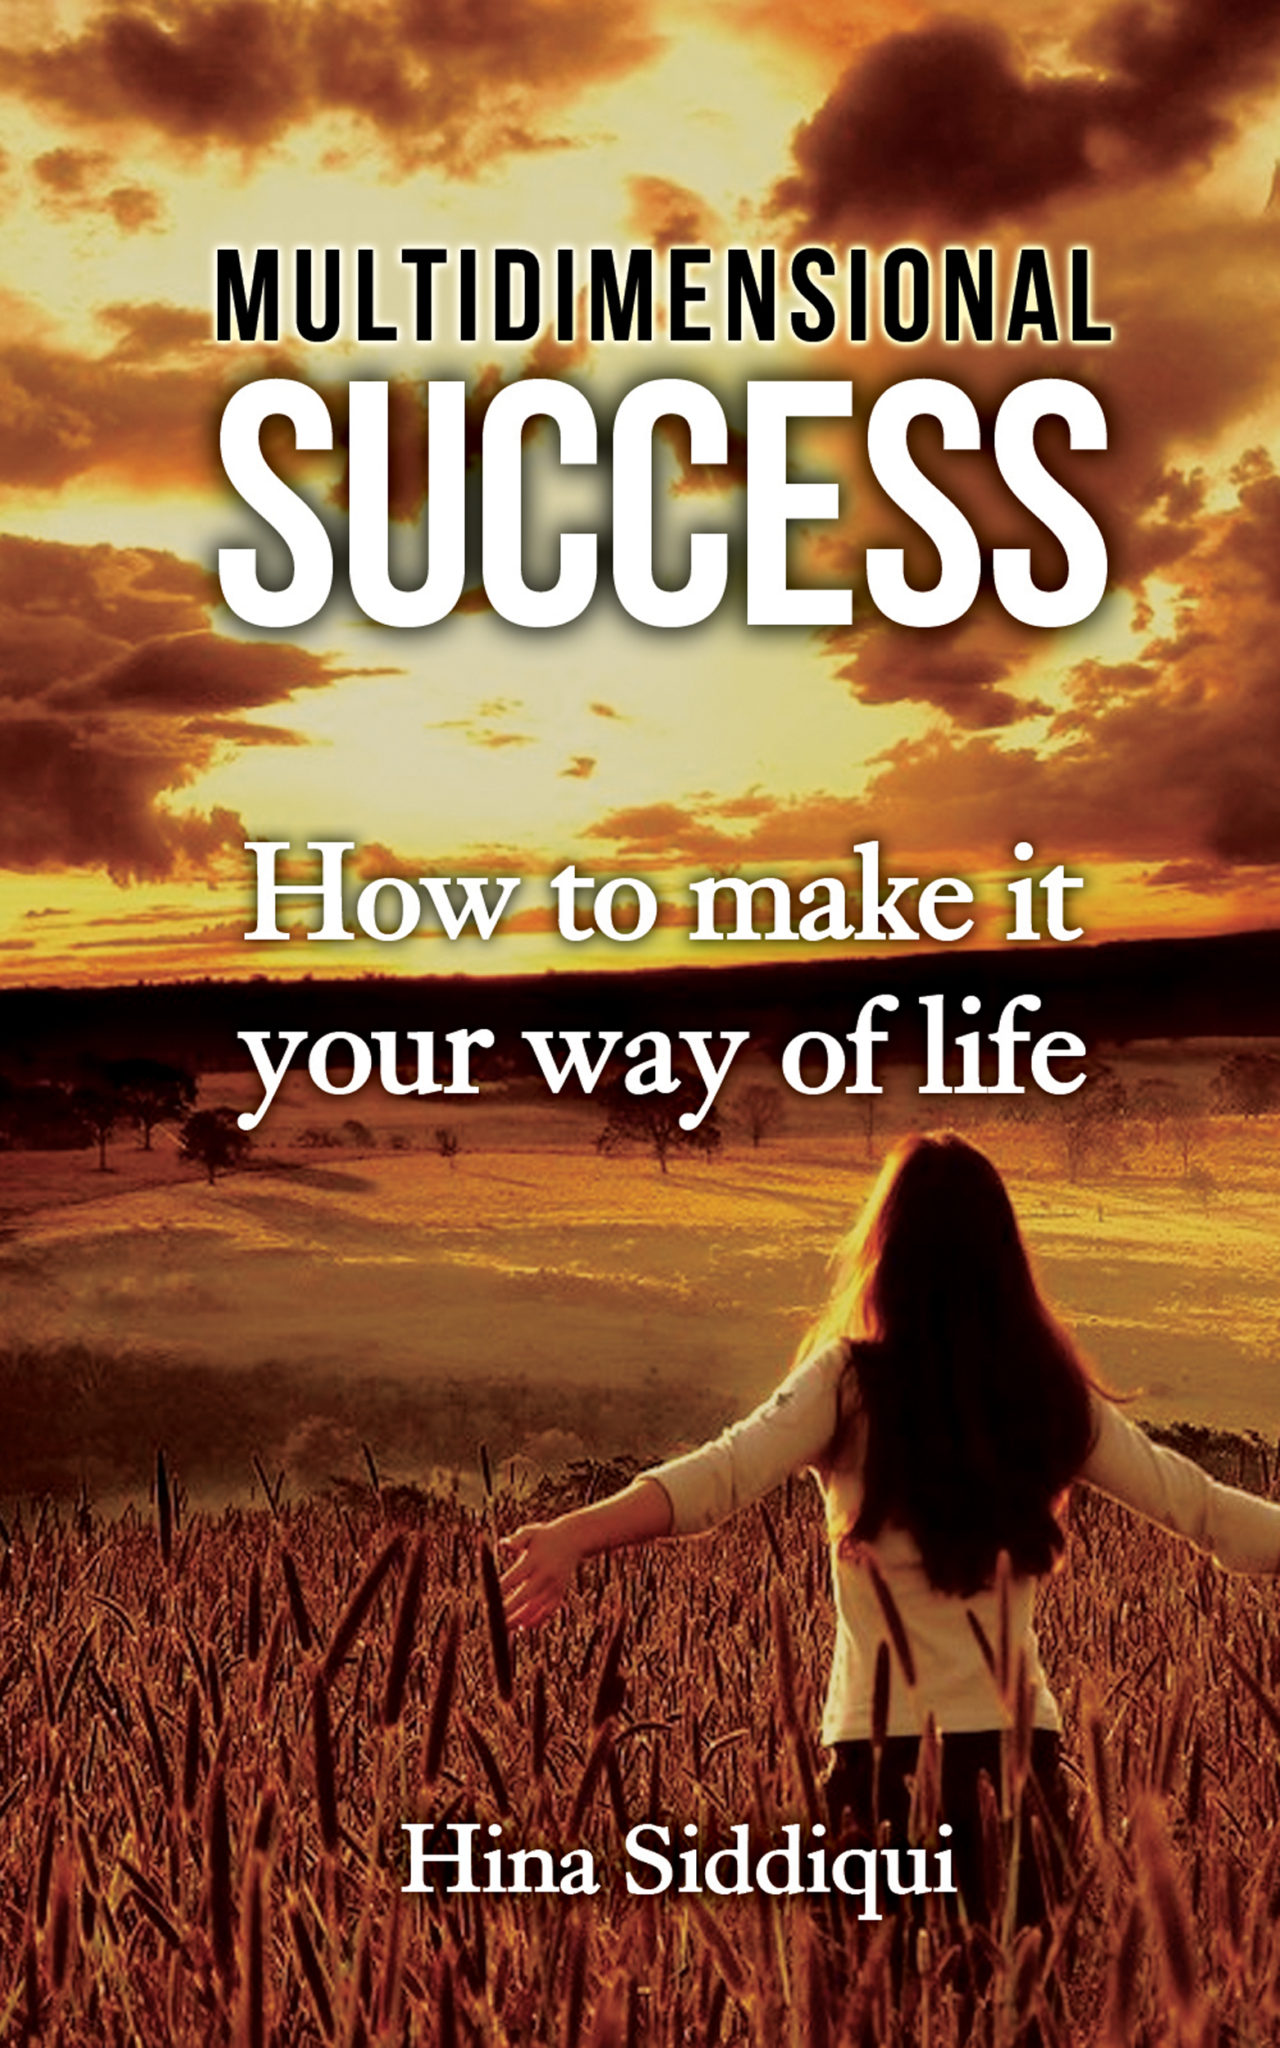 FREE: Multidimensional Success: How to Make it Your Way of Life by Hina Siddiqui